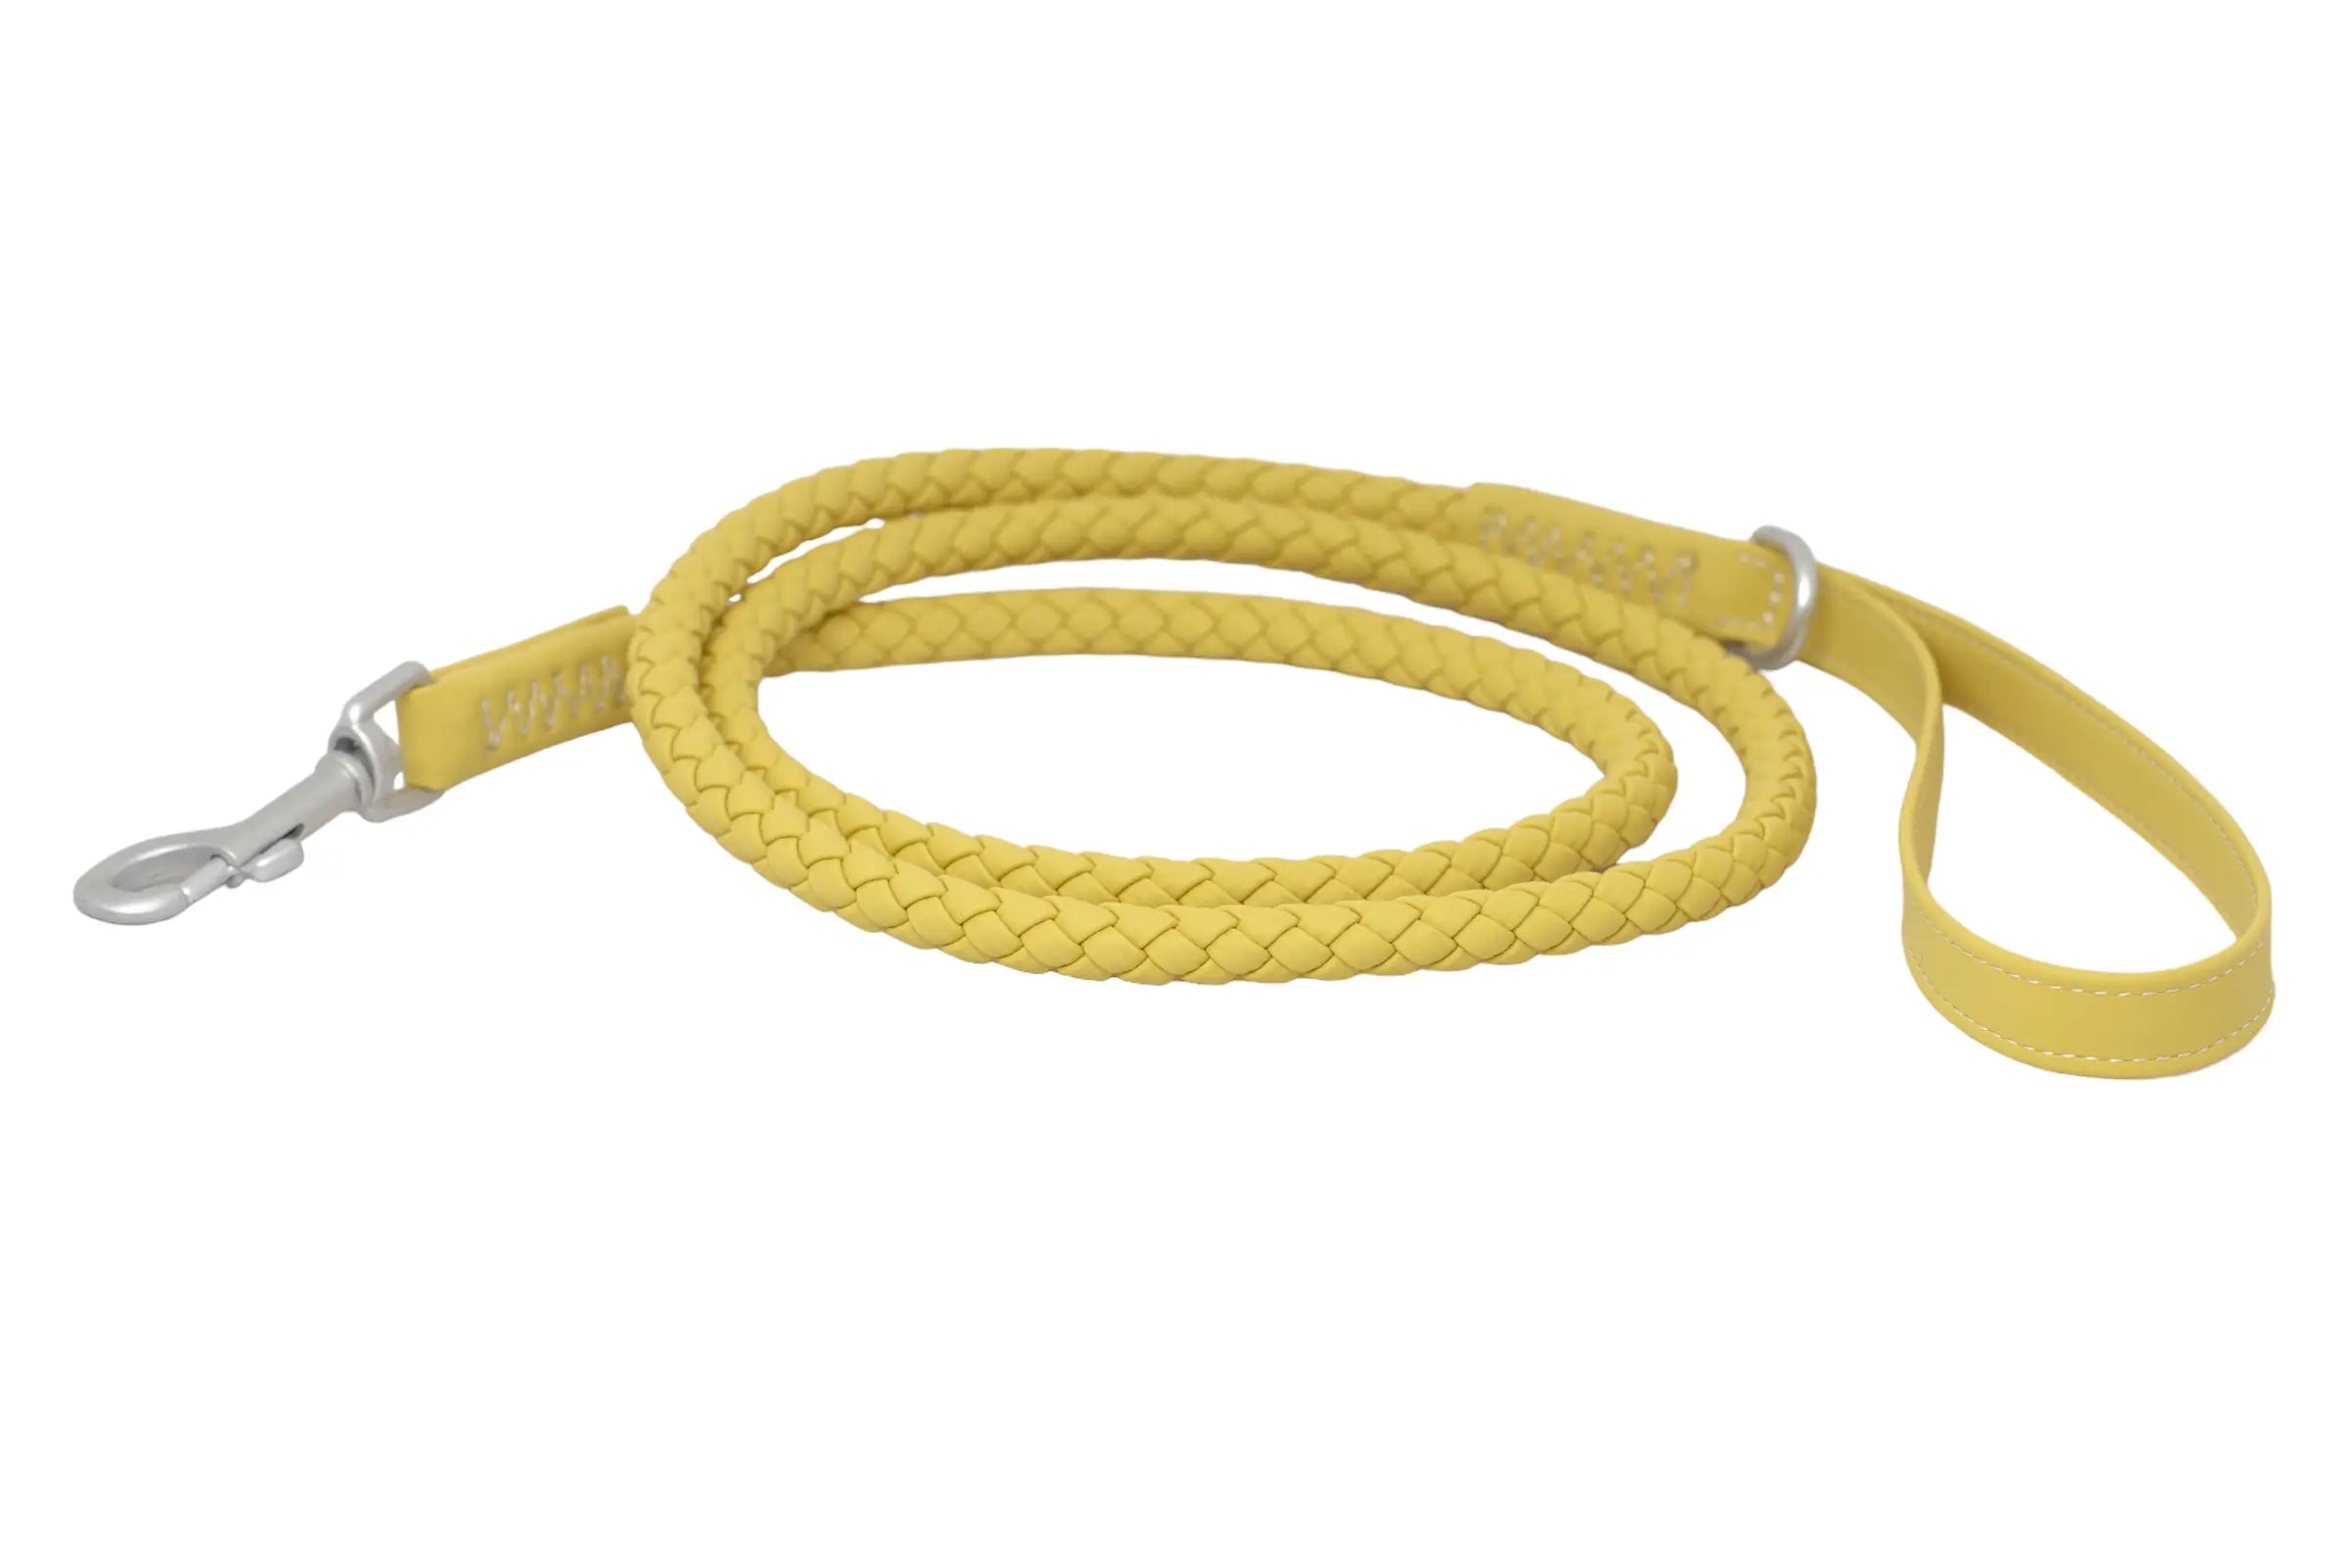 Front of a waterproof and durable dog leash with marine grade anodized aluminum hardware in the color honey yellow.